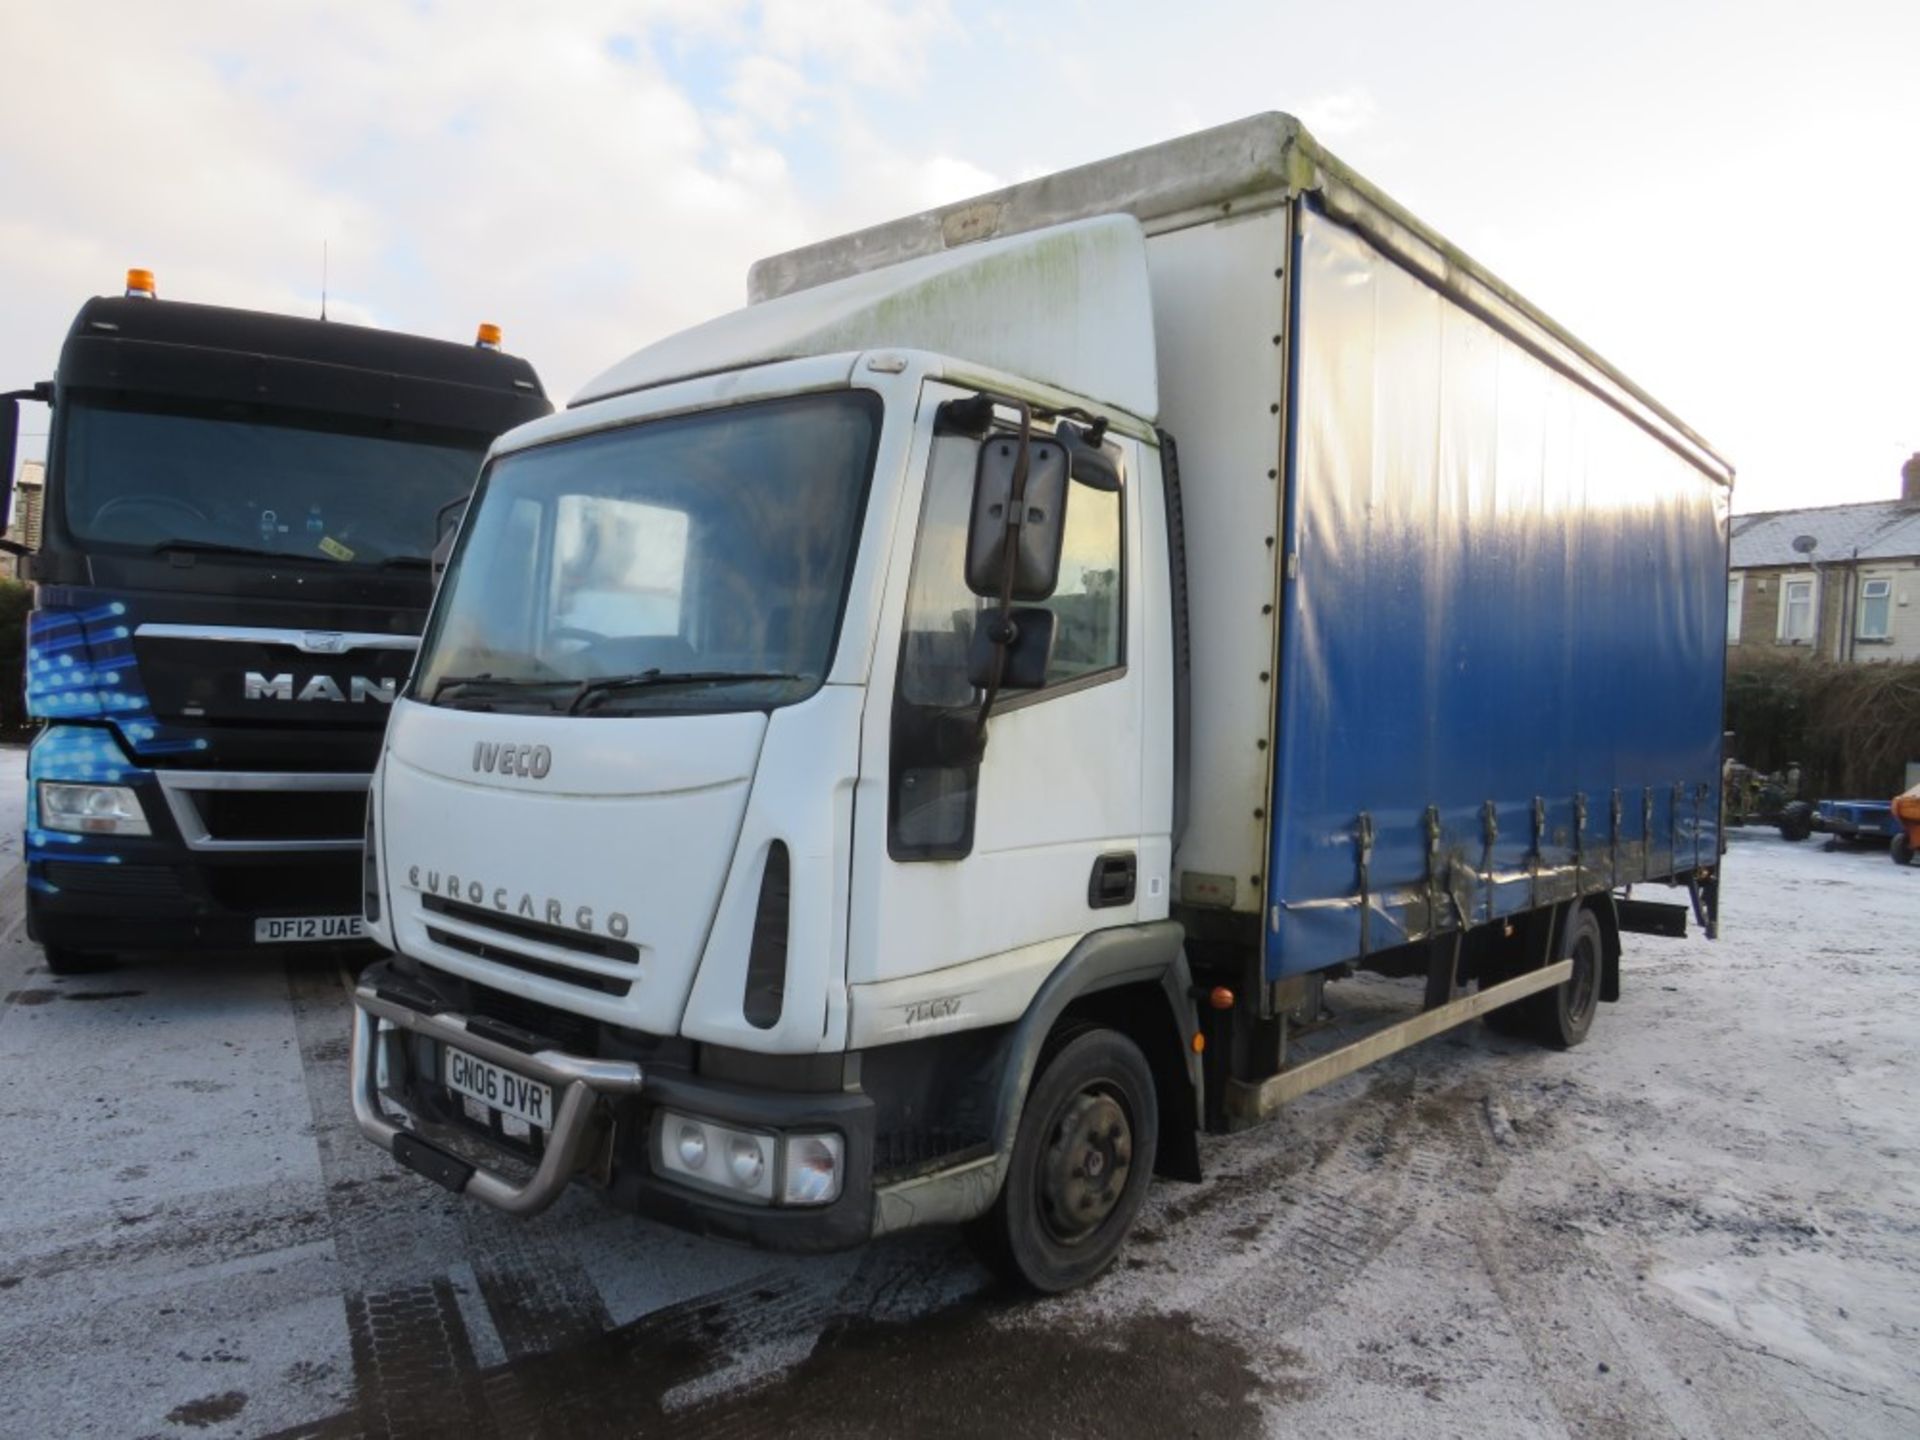 06 reg IVECO CURTAIN SIDE C/W TAIL LIFT, 1ST REG 04/06, 559437KM, V5 HERE, 3 FORMER KEEPERS [NO - Image 2 of 6